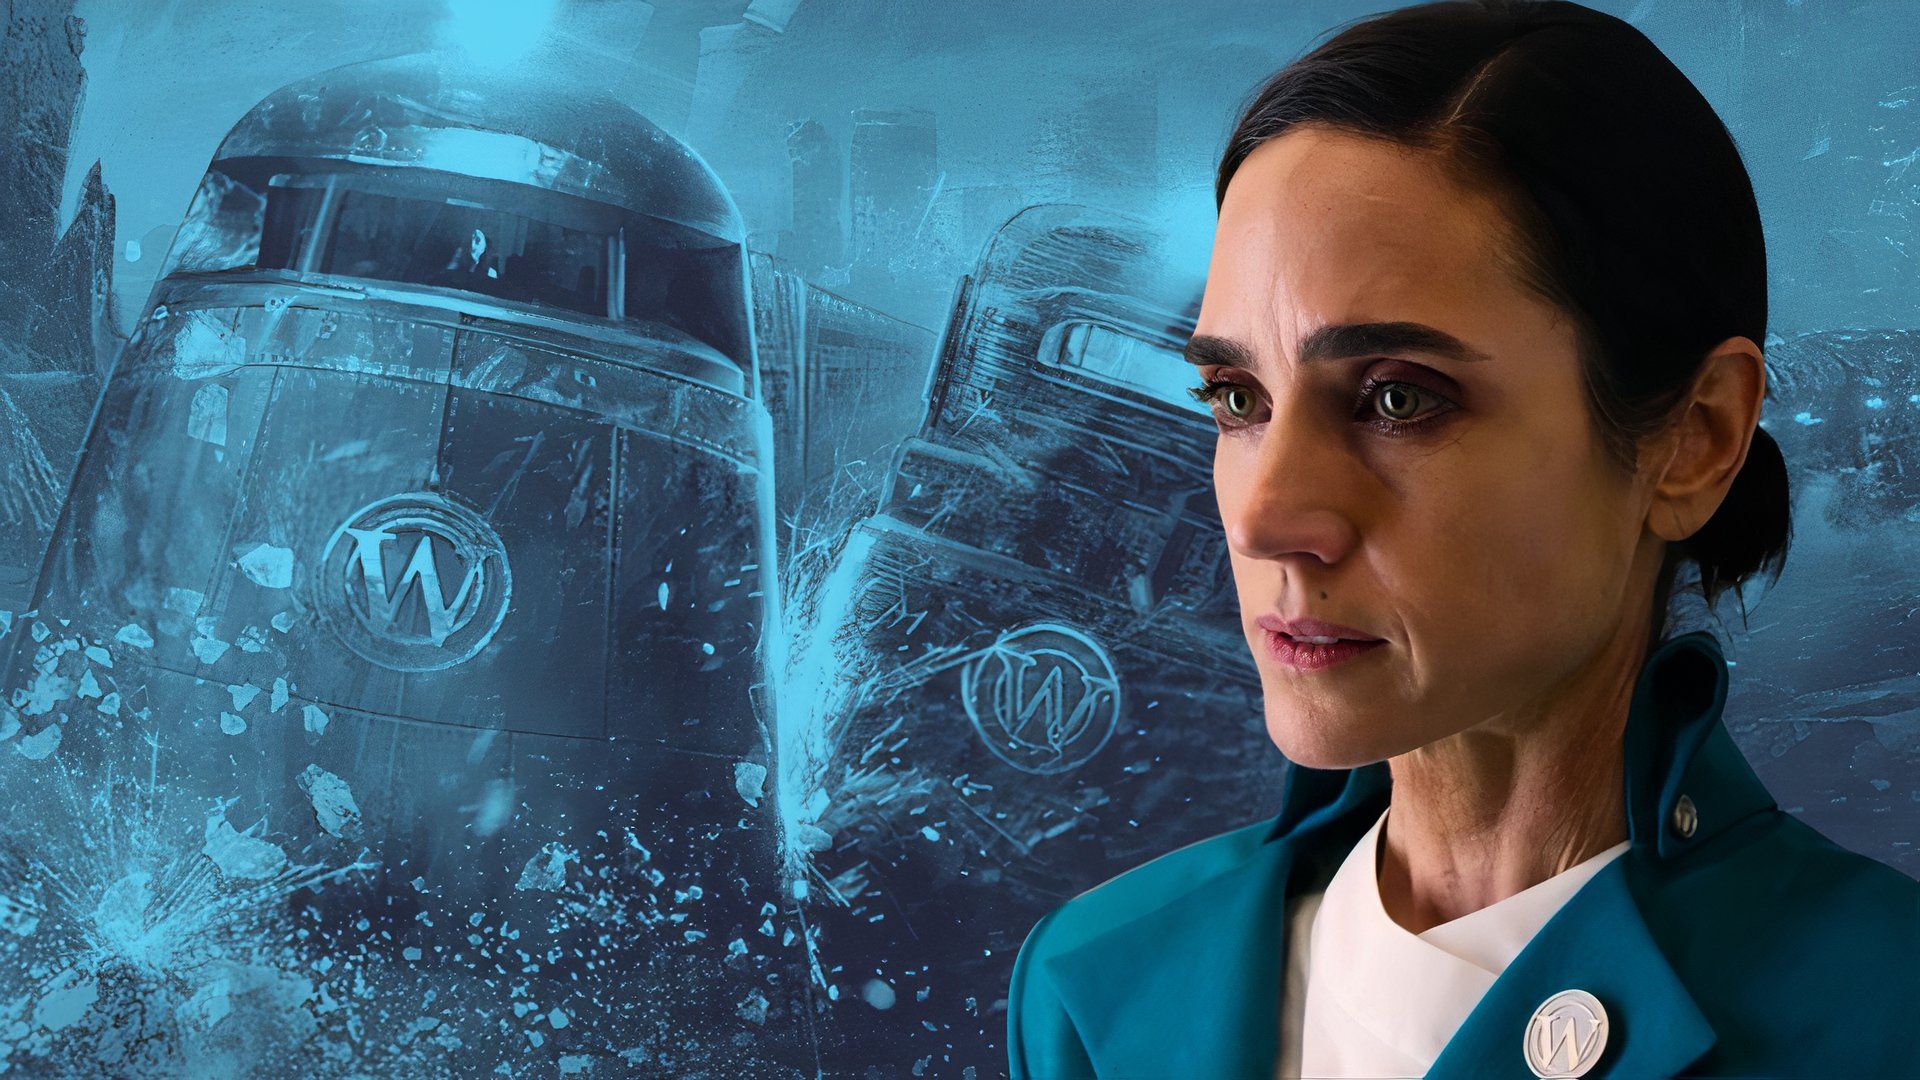 An edited image of Jennifer Connelly next to the train from Snowpiercer in Snowpiercer